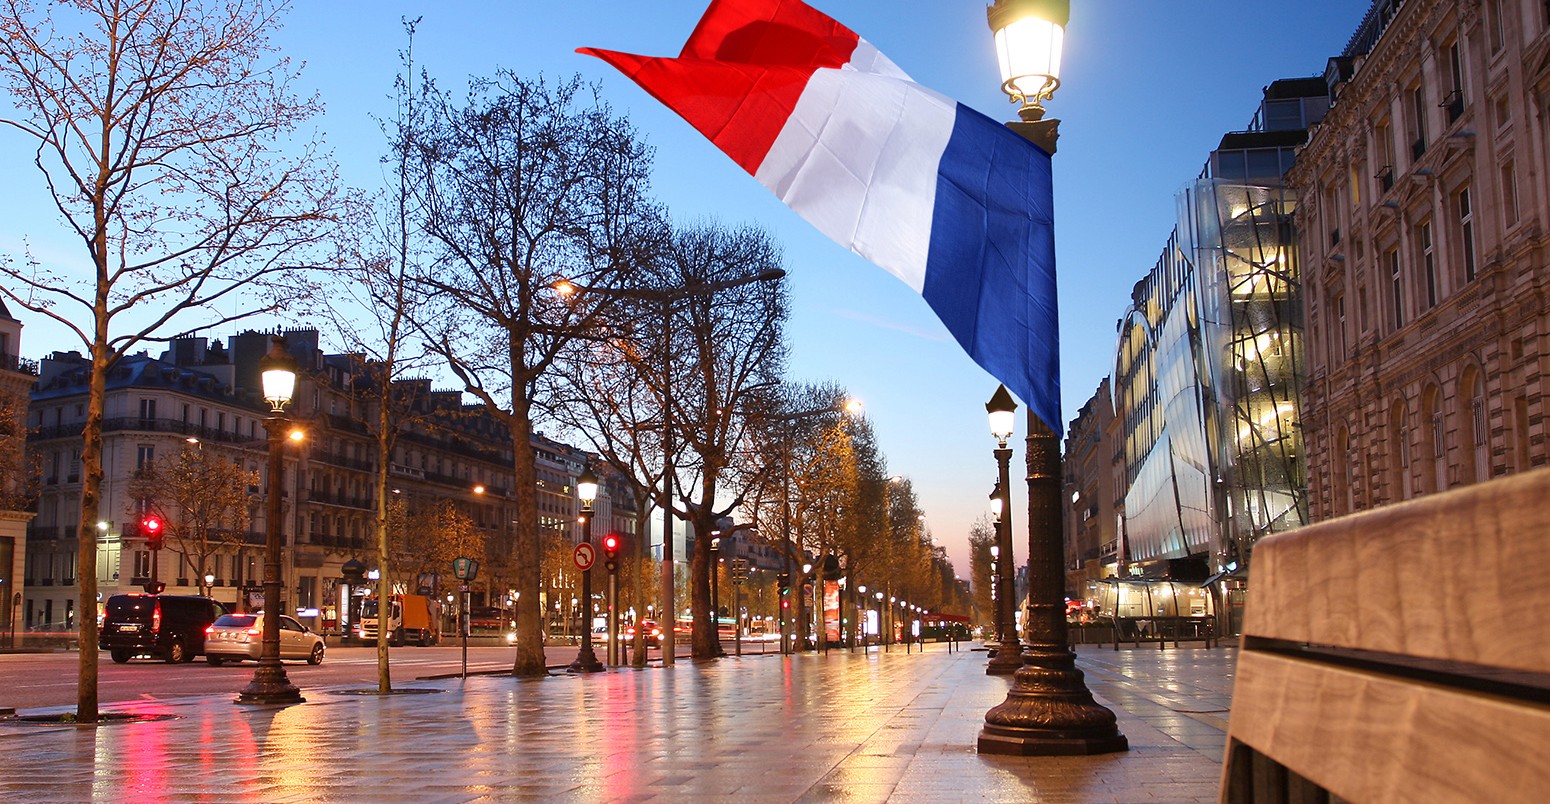 Flag flying in the Paris Champs Elysee street in the evening